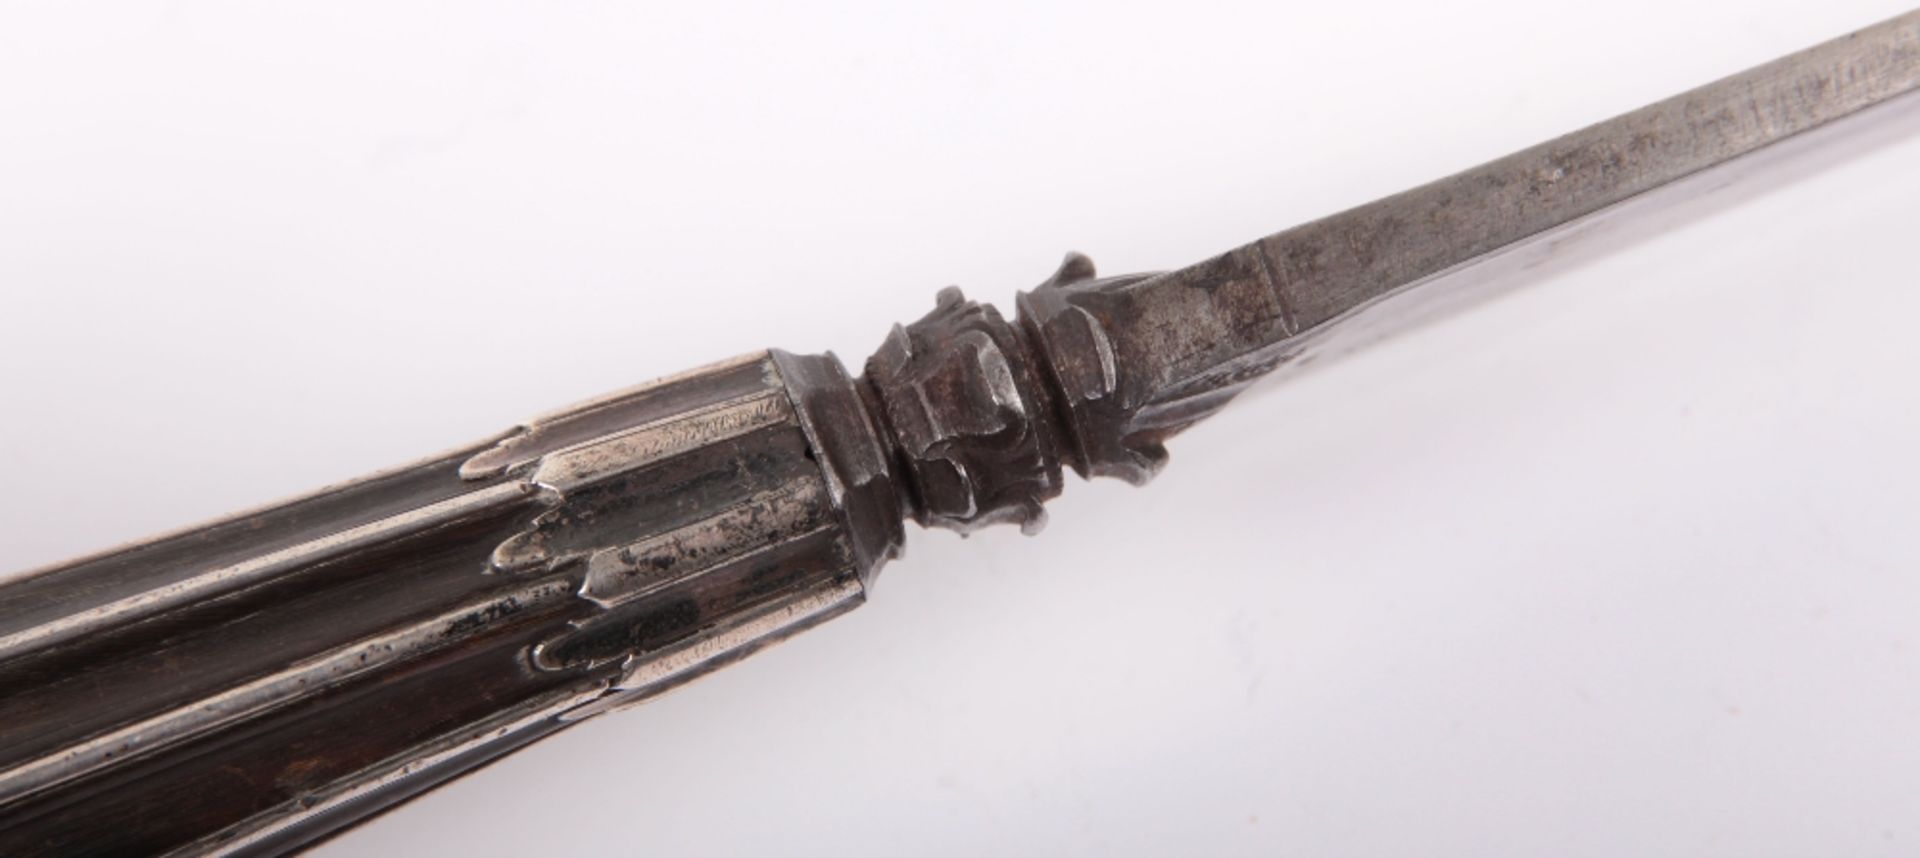 Late 18th Century Silver Mounted Neapolitan Dagger - Image 5 of 10